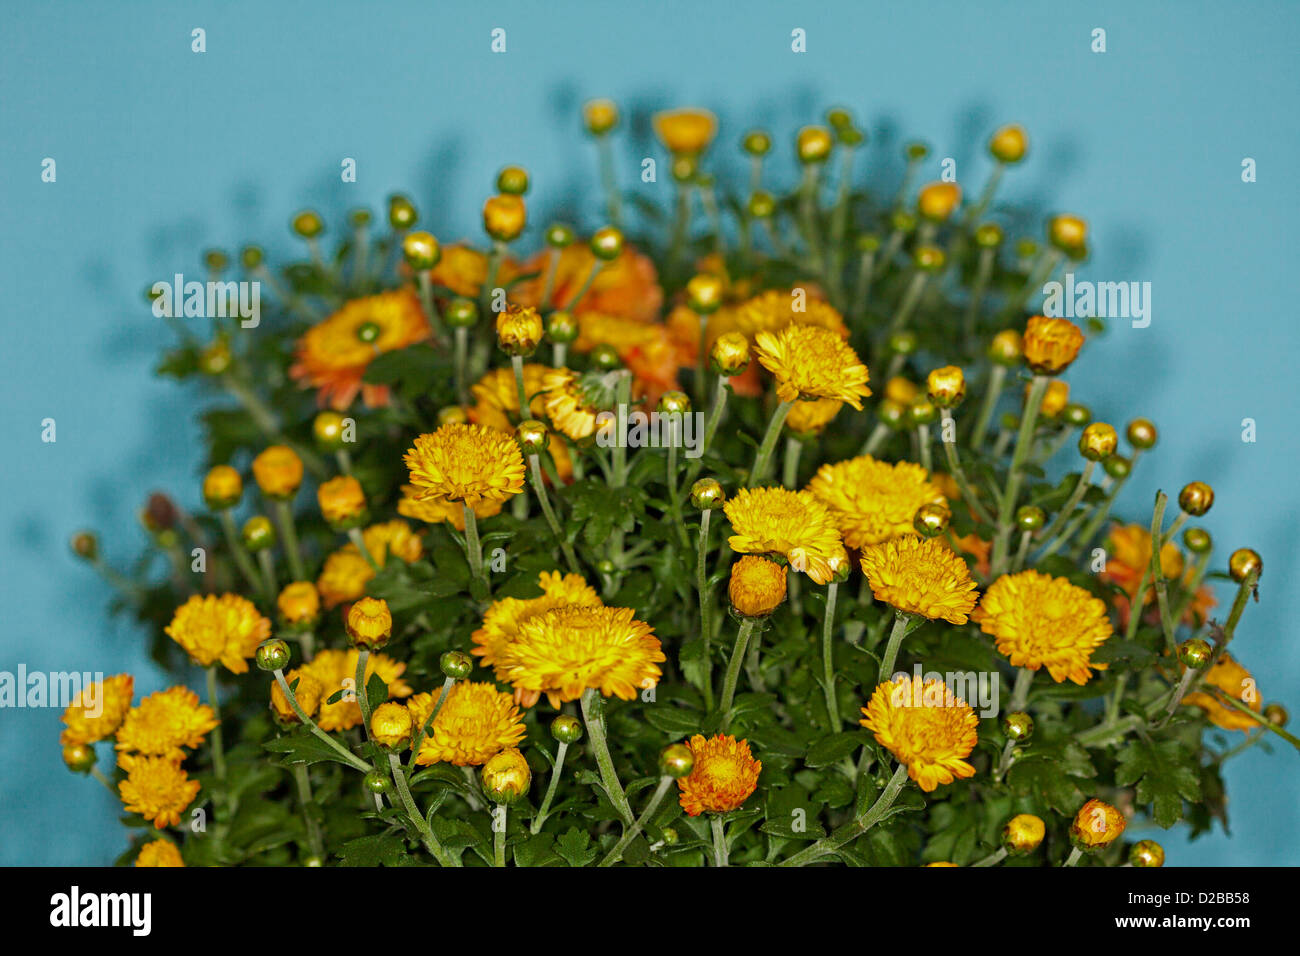 Golden yellow and orange flowers and foliage of Chrysanthemum multicolor 'Fantasia' against a sky blue background Stock Photo